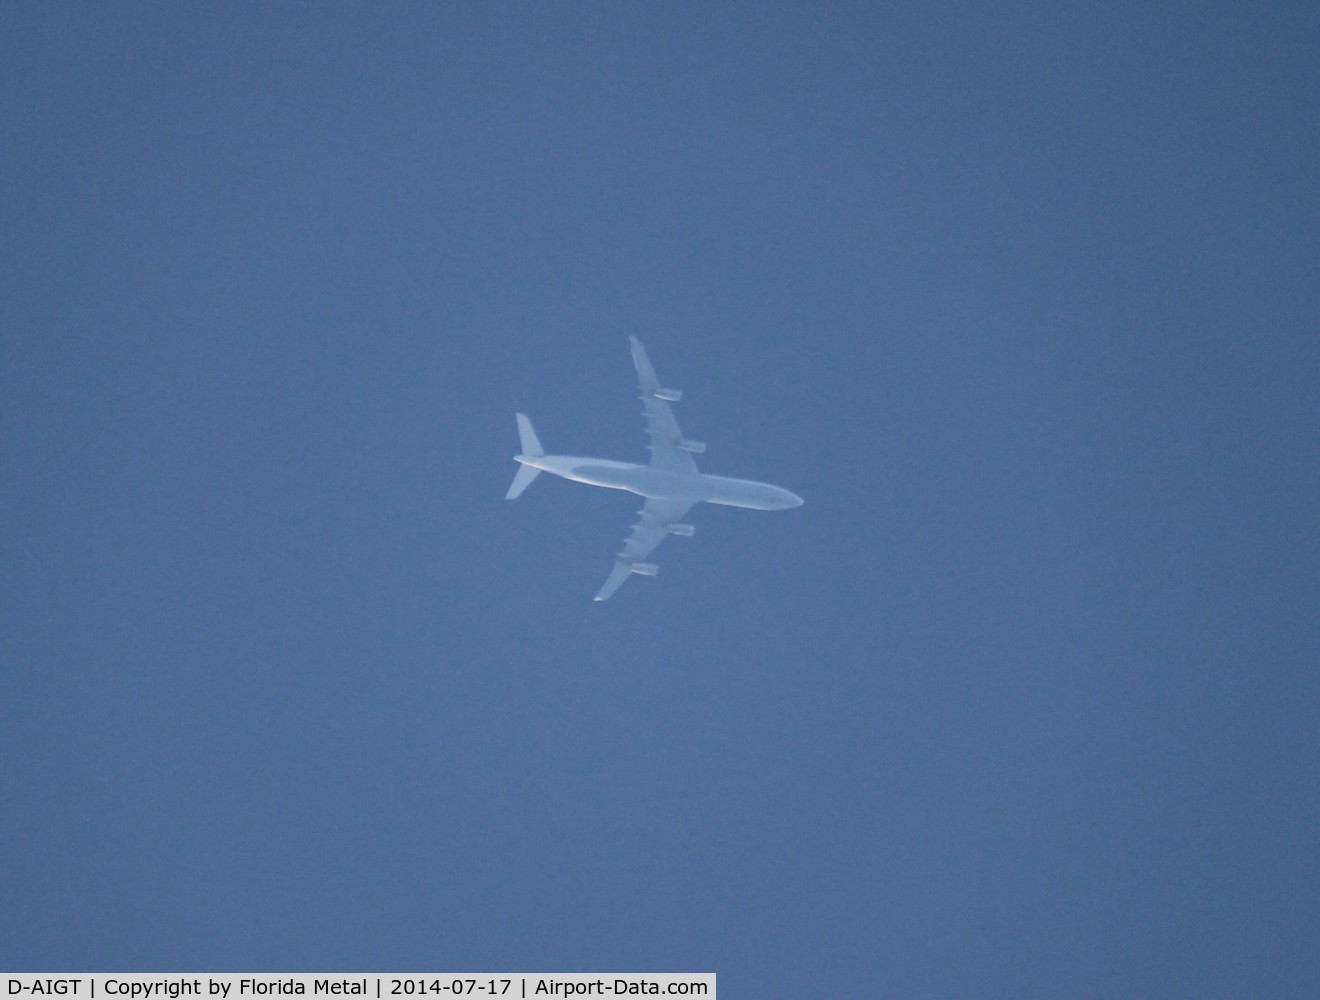 D-AIGT, 1999 Airbus A340-313 C/N 304, Lufthansa A340-300 flying 32,000 ft from ORD - DUS over Livonia Michigan